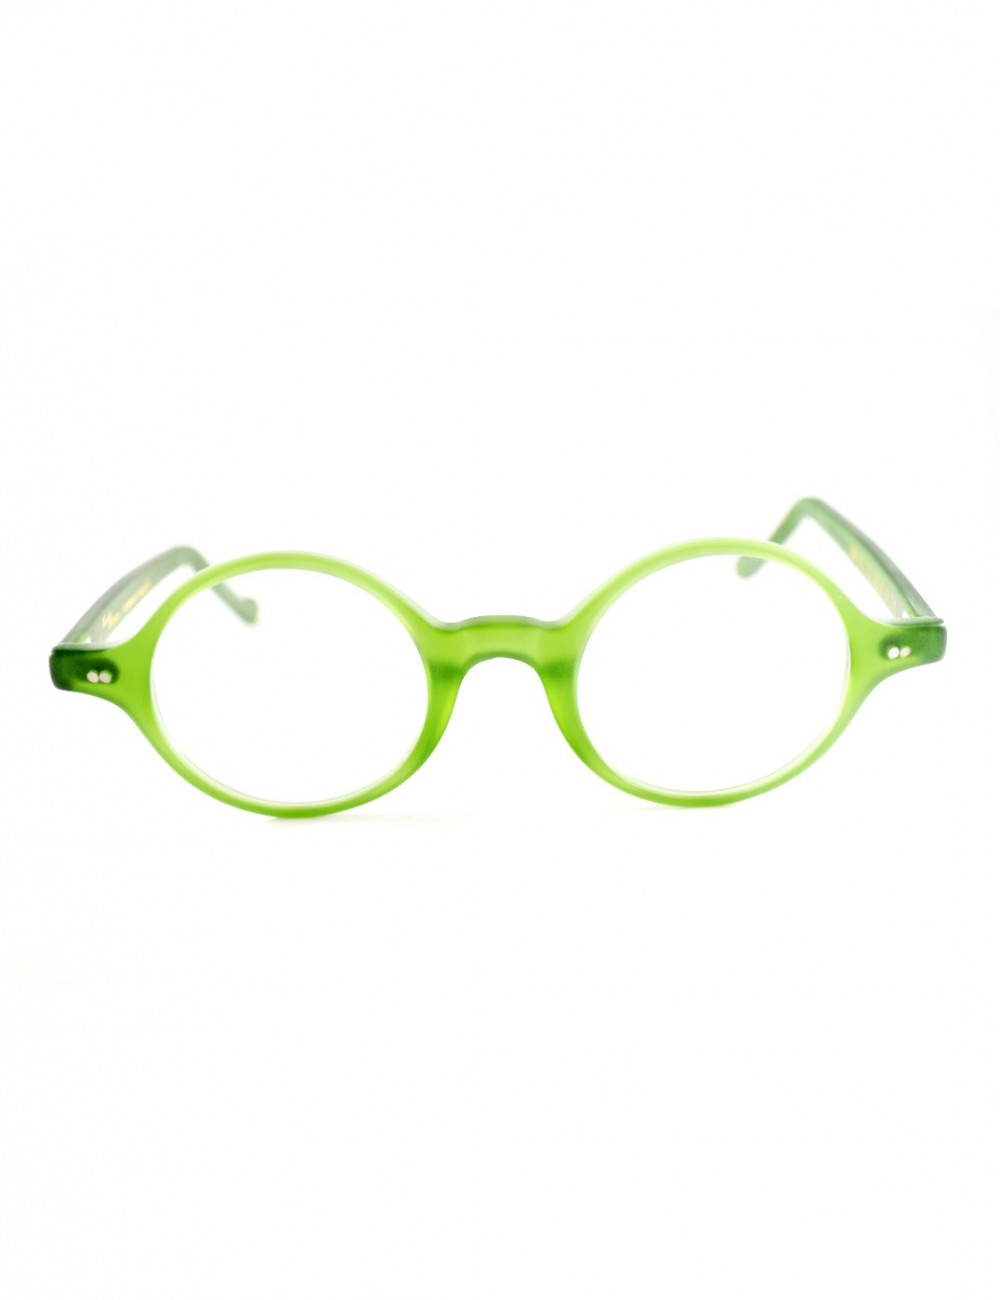 Franklo Frank Lo Ray 69-69 green matte limited edition 2/4 